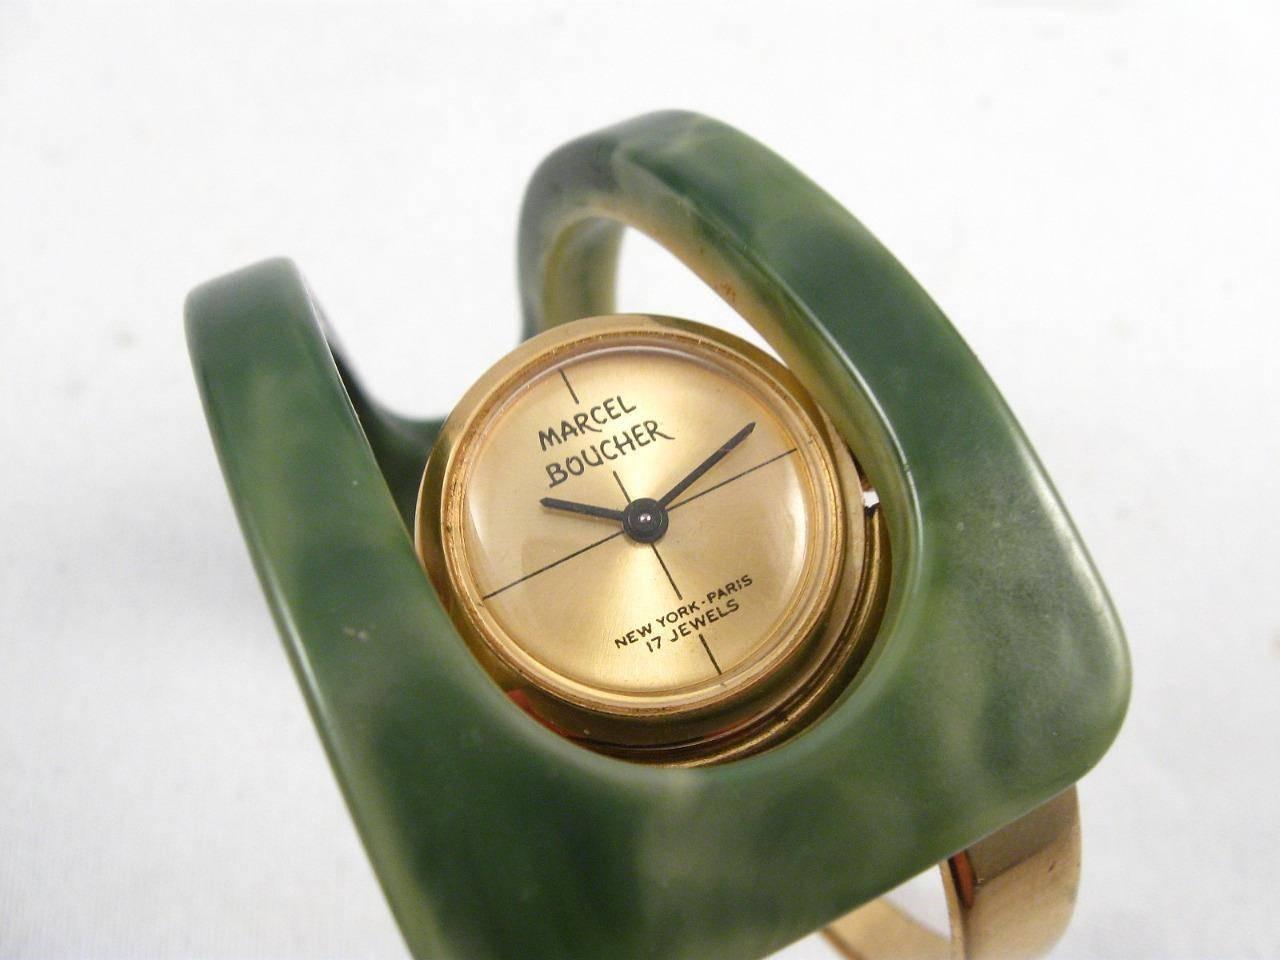 Art Deco /Mid Century, Marbled Green Bakelite and Gold tone Clamper Wrist Watch. All in excellent condition, negligible wear, nearly as new, including the rear of the watch and the face is immaculate. Keeping good time for age, checked, cleaned and